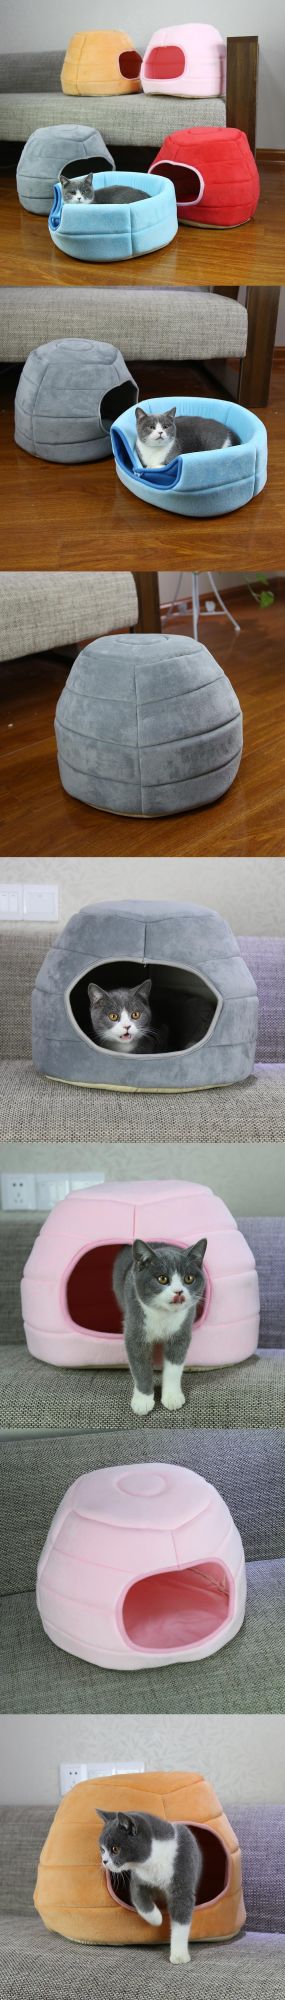 Wholesale High Quality Wood Kennels Dog Iron Circular Platform Semi-Enclosed Creative Cat Nest Kennel Bed